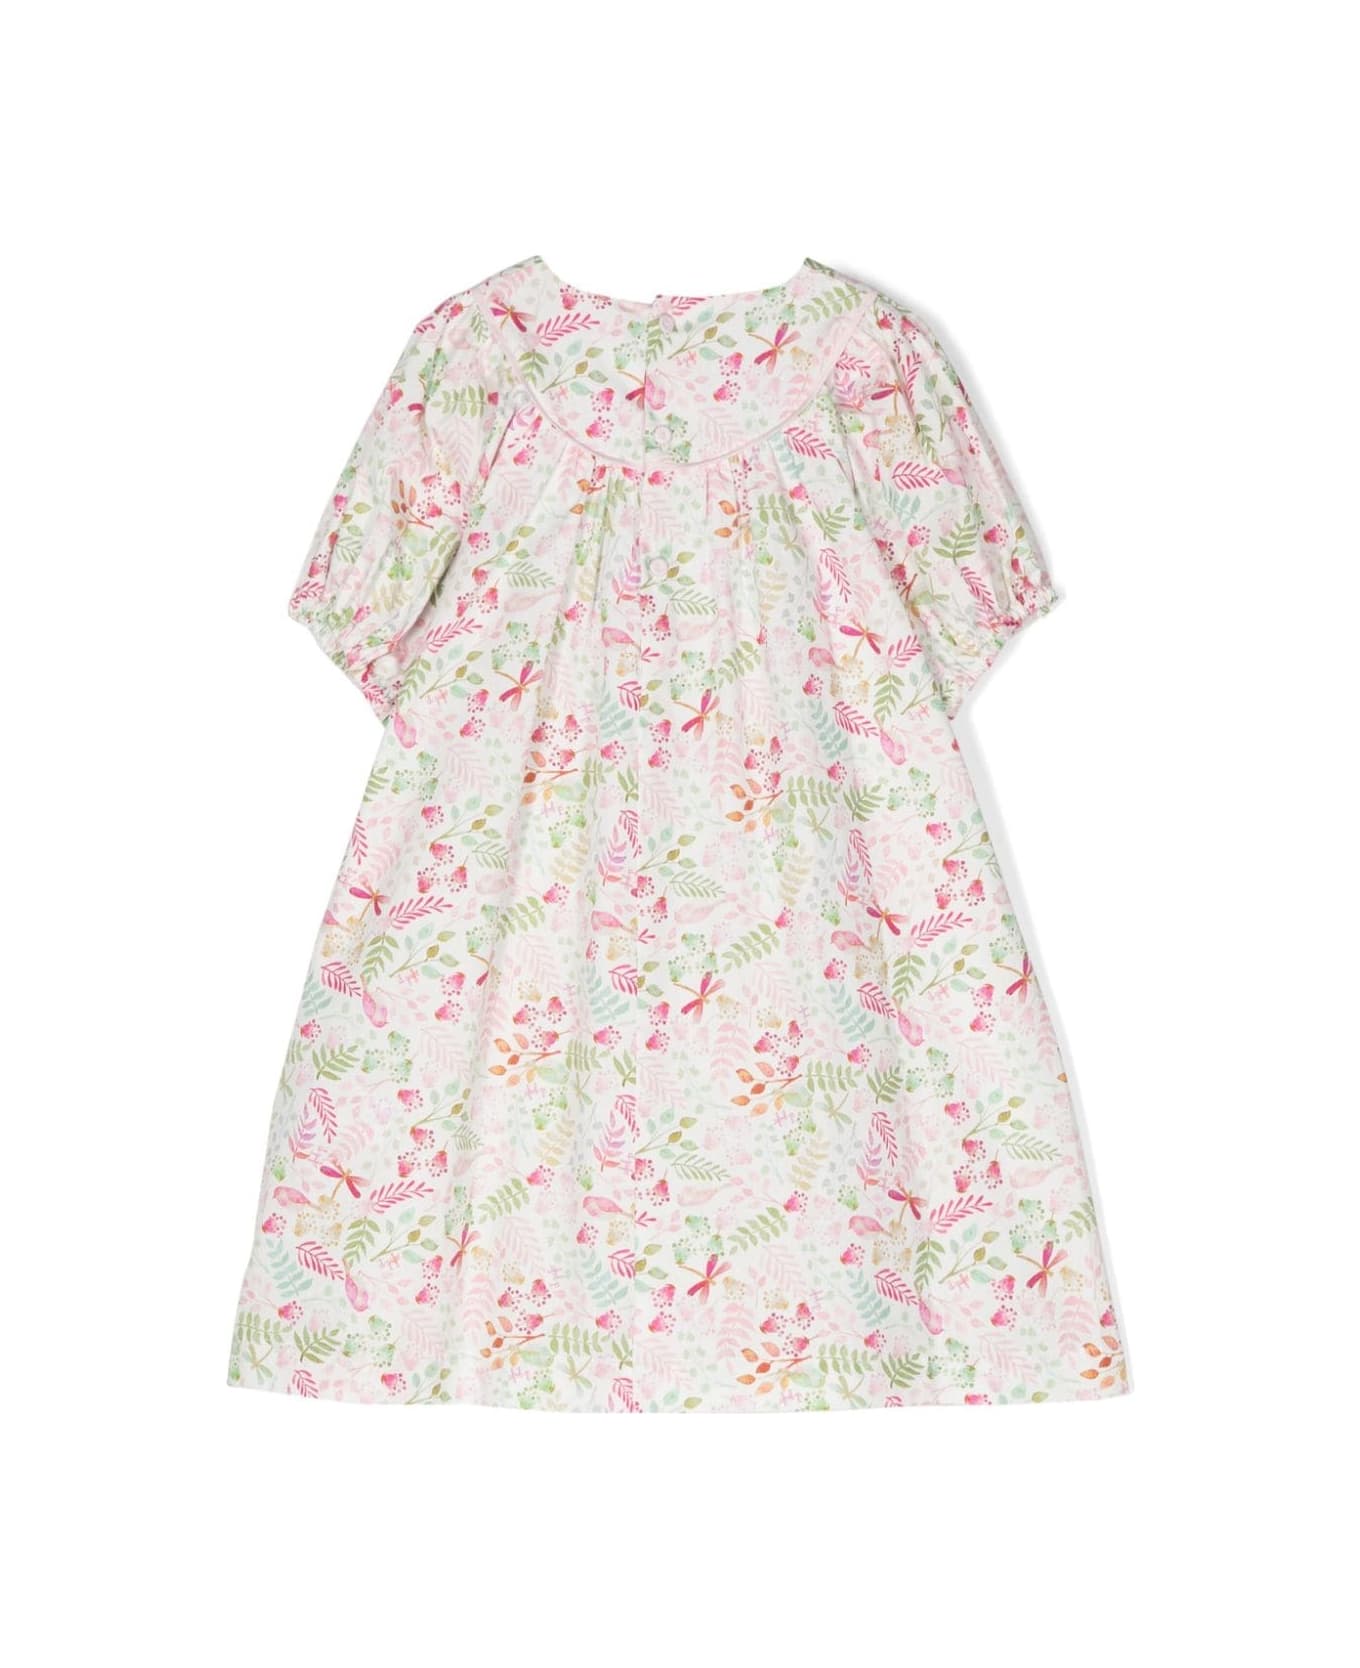 Il Gufo Cotton Dress With Pink Floral Print - Pink